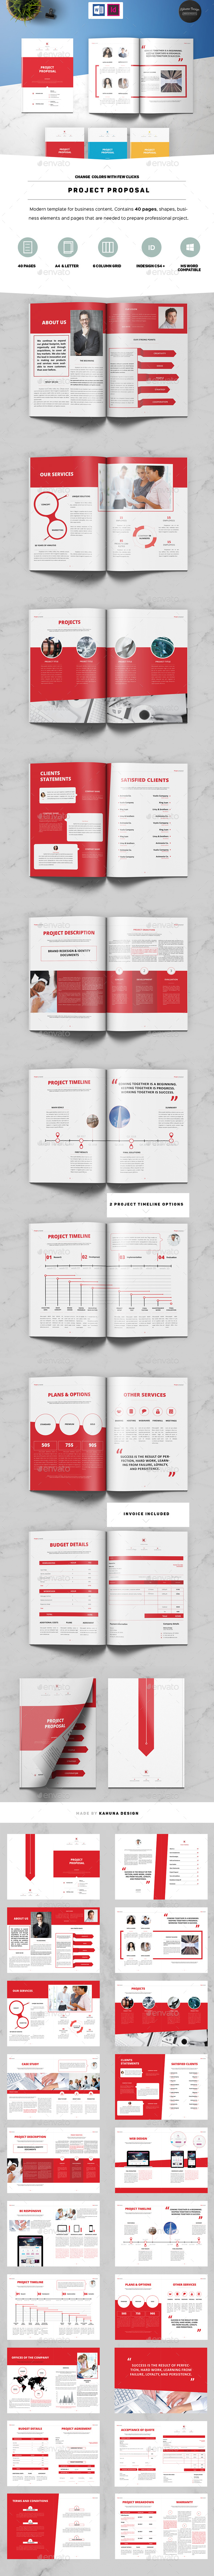 Graphicriver project proposal 17770141 download free version